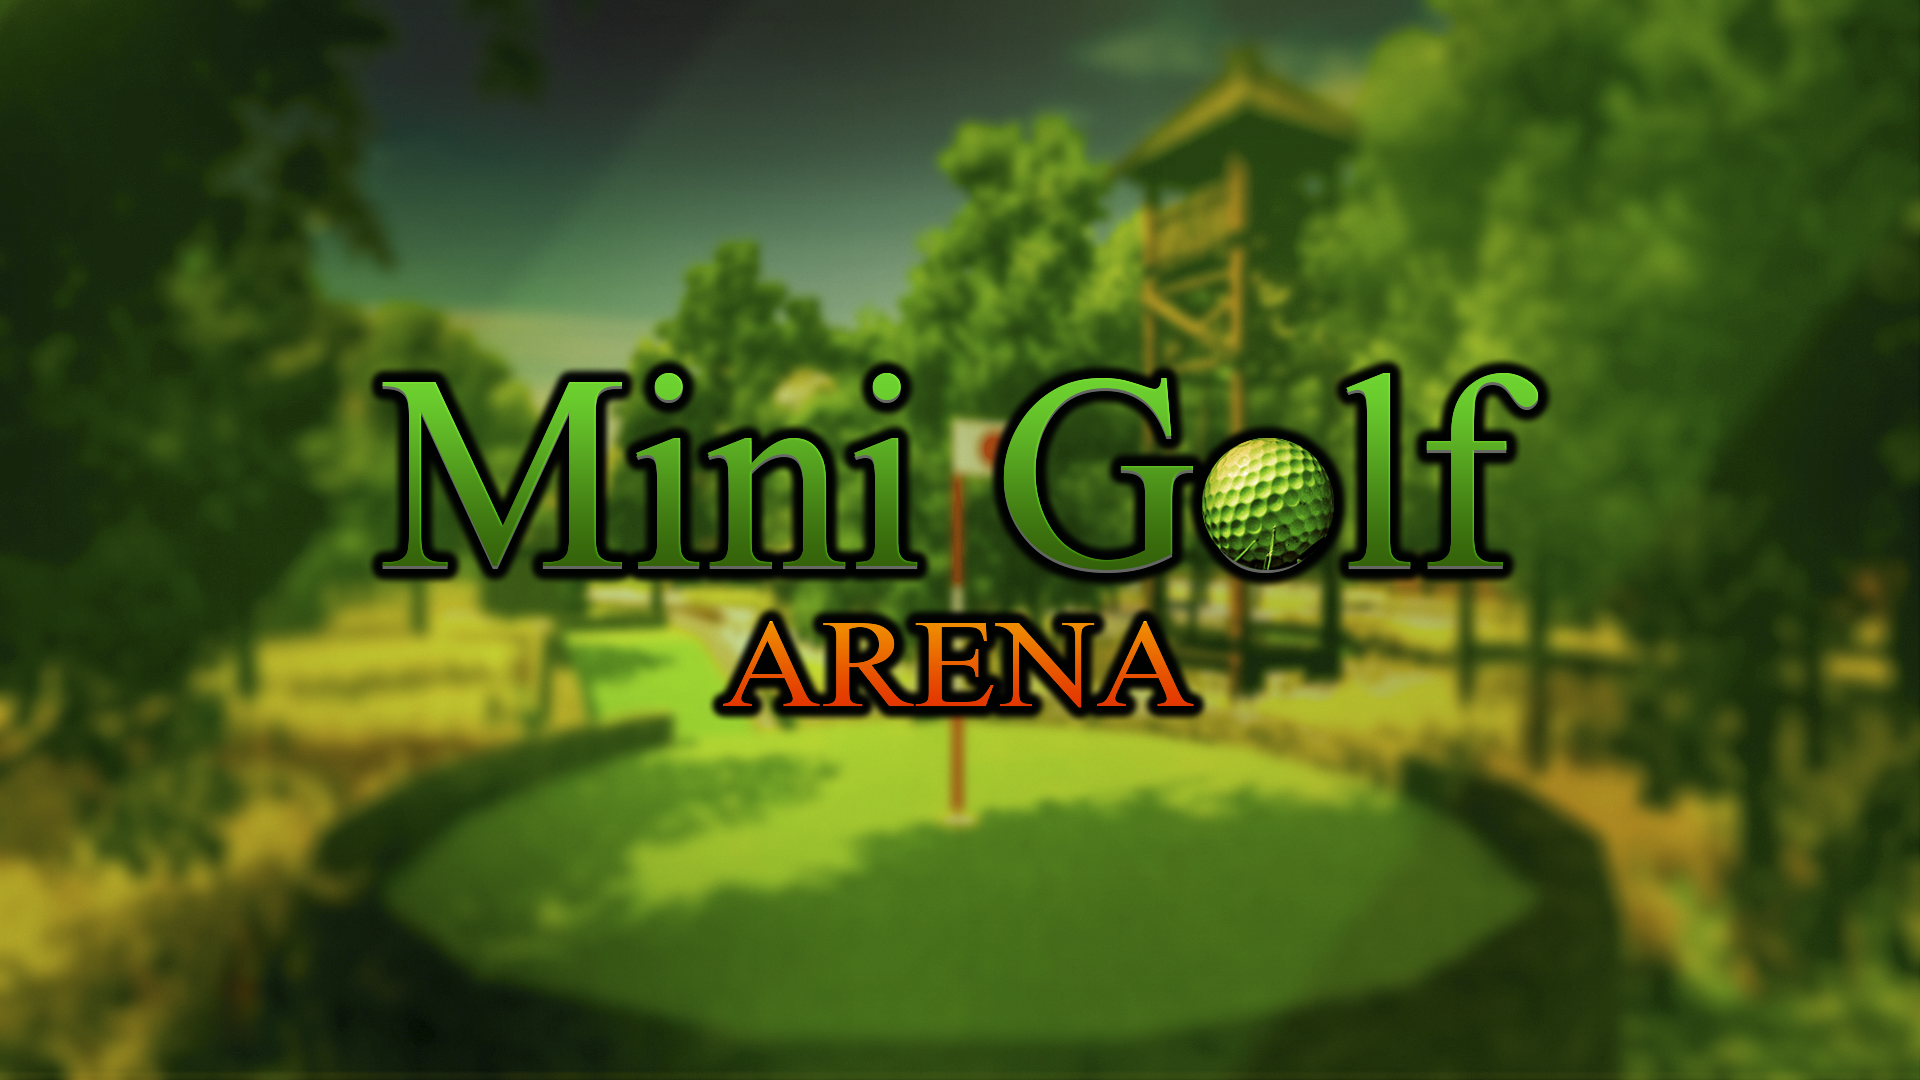 golf with your friends custom map